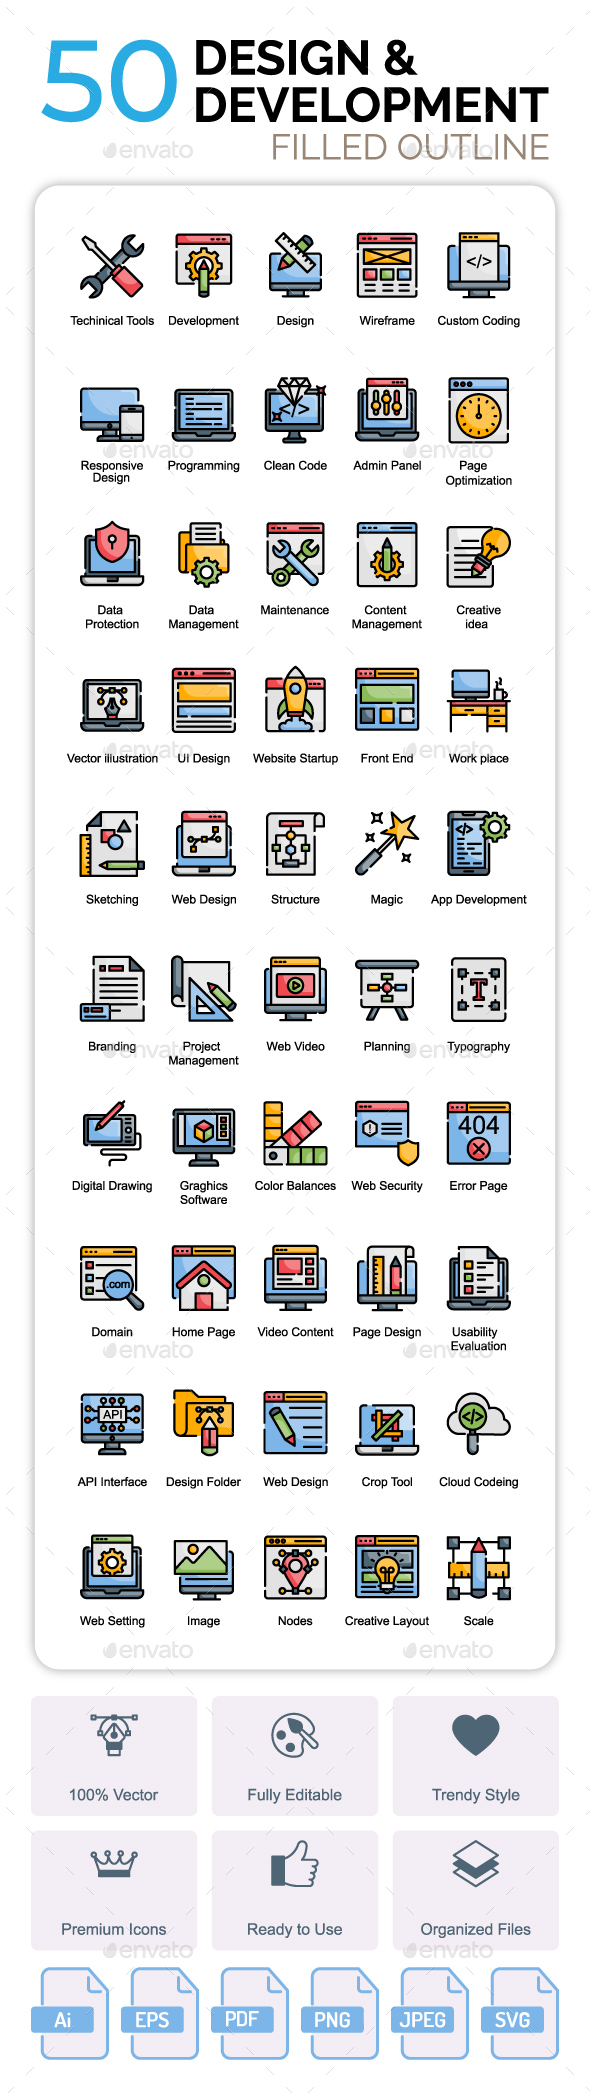 Design and Development Filled Outline Icons Set